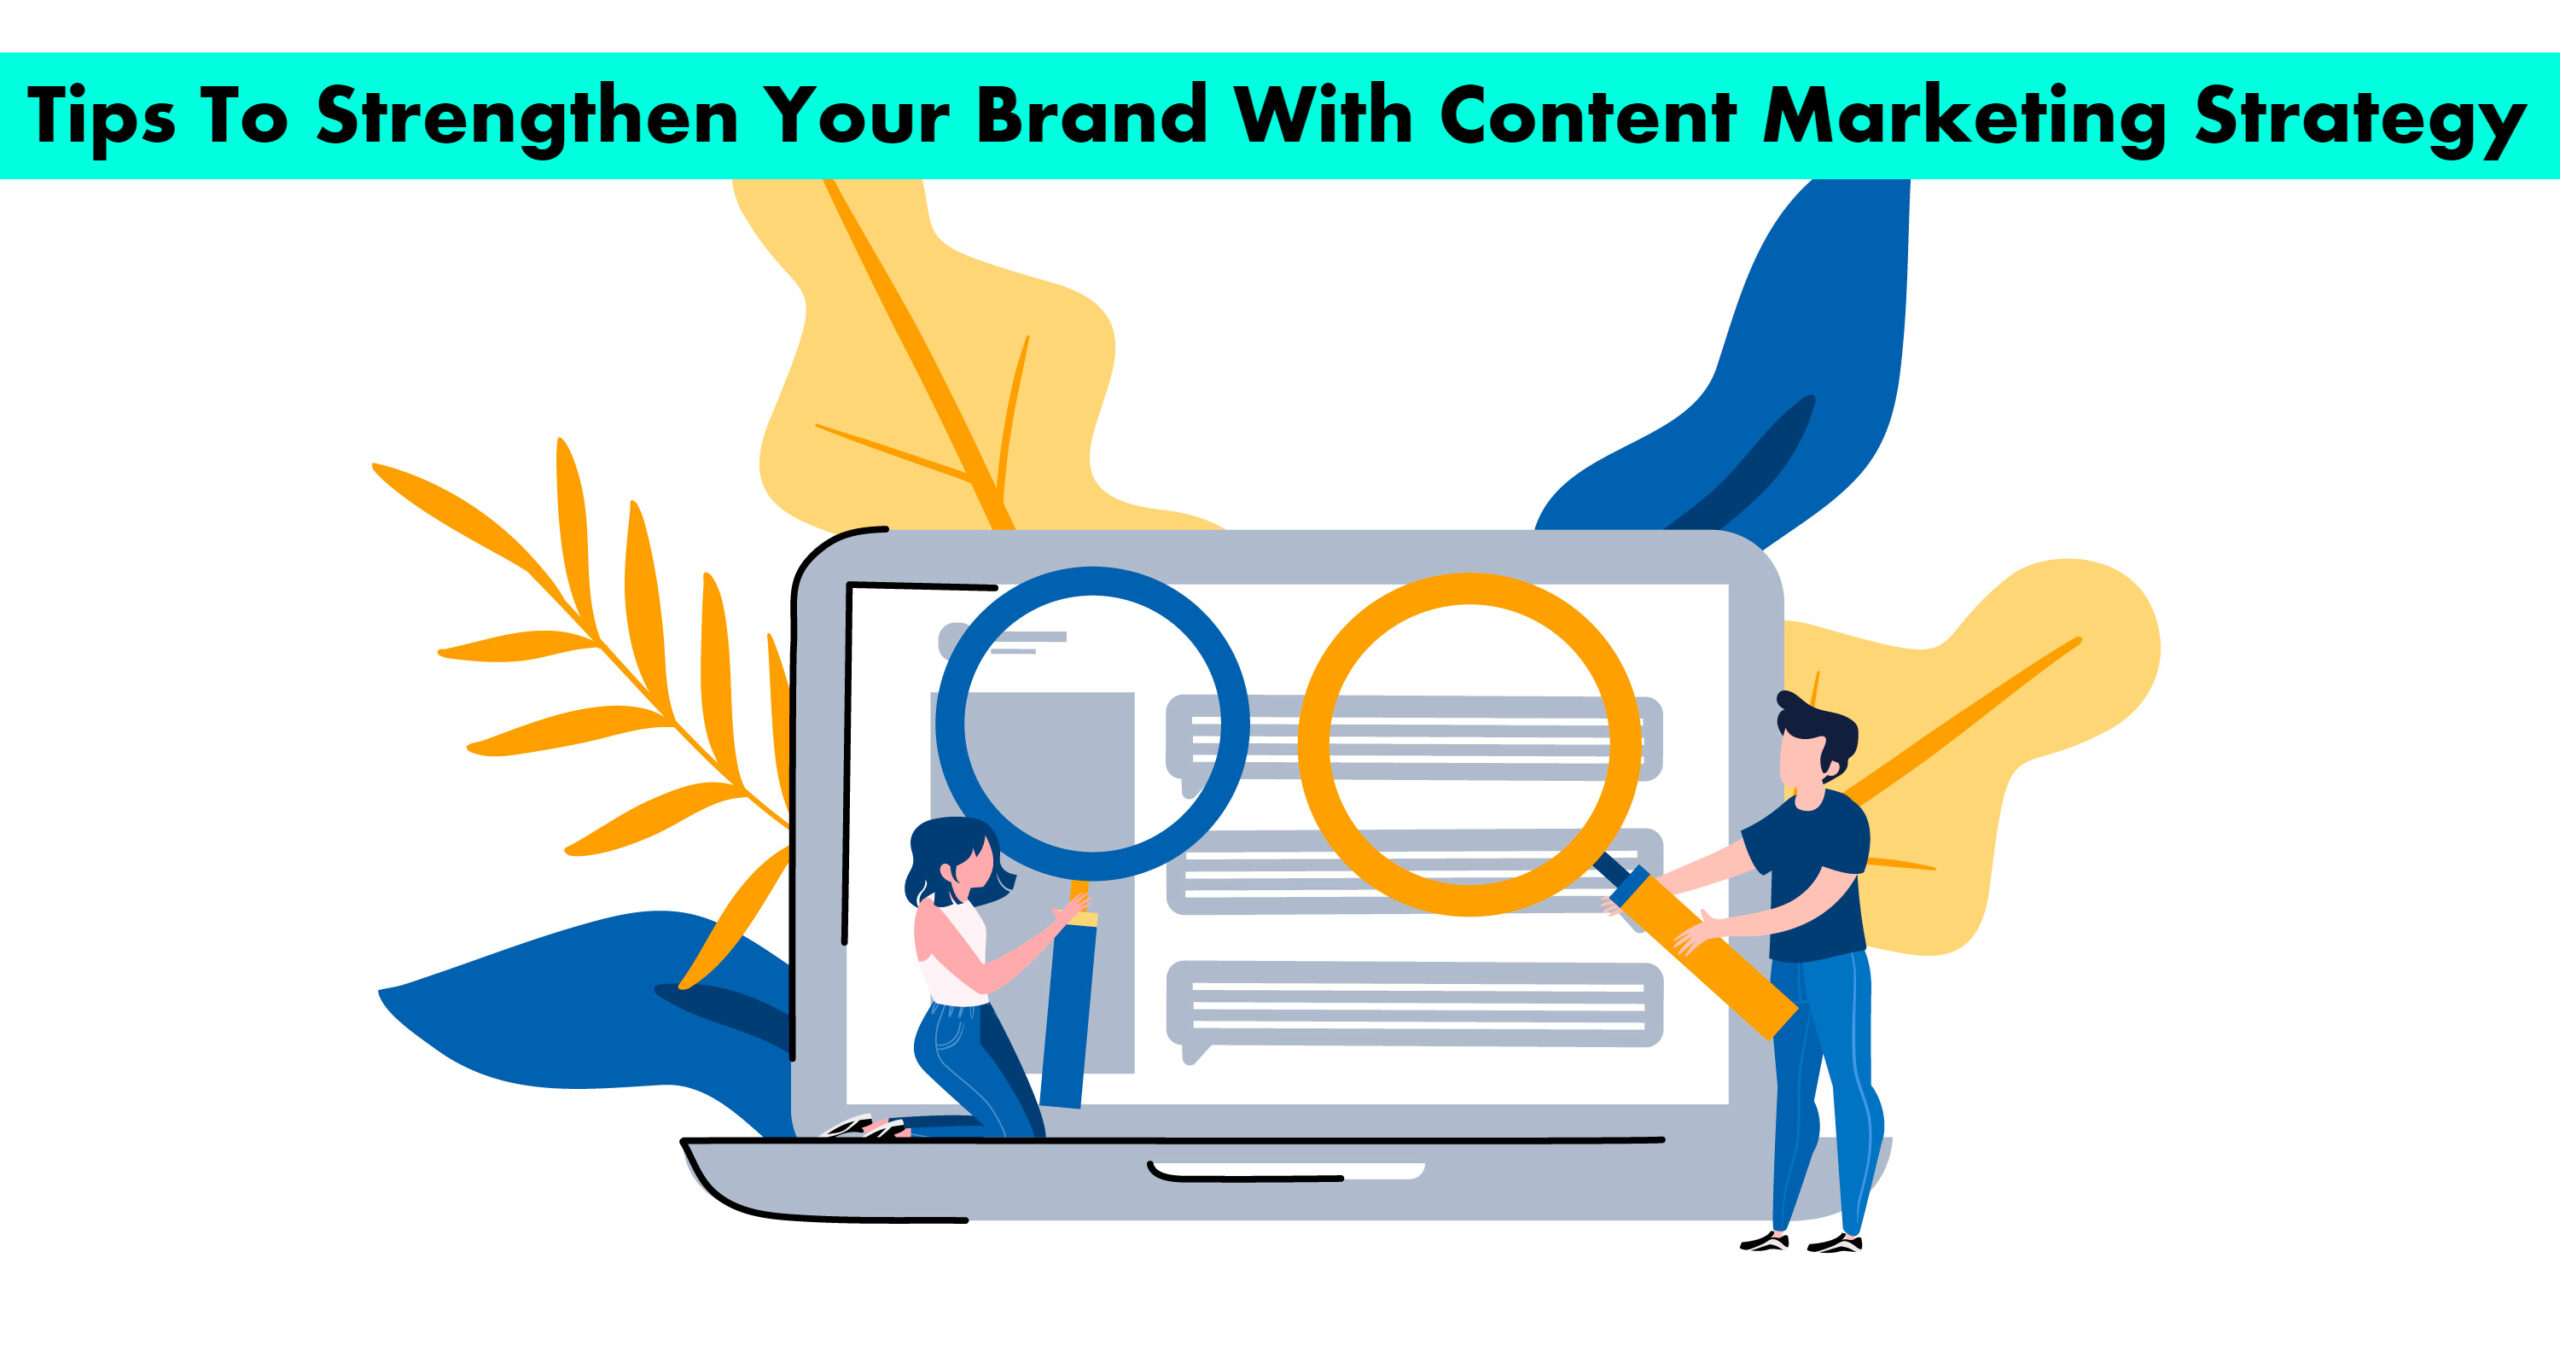 Vector image showing content marketing illustration